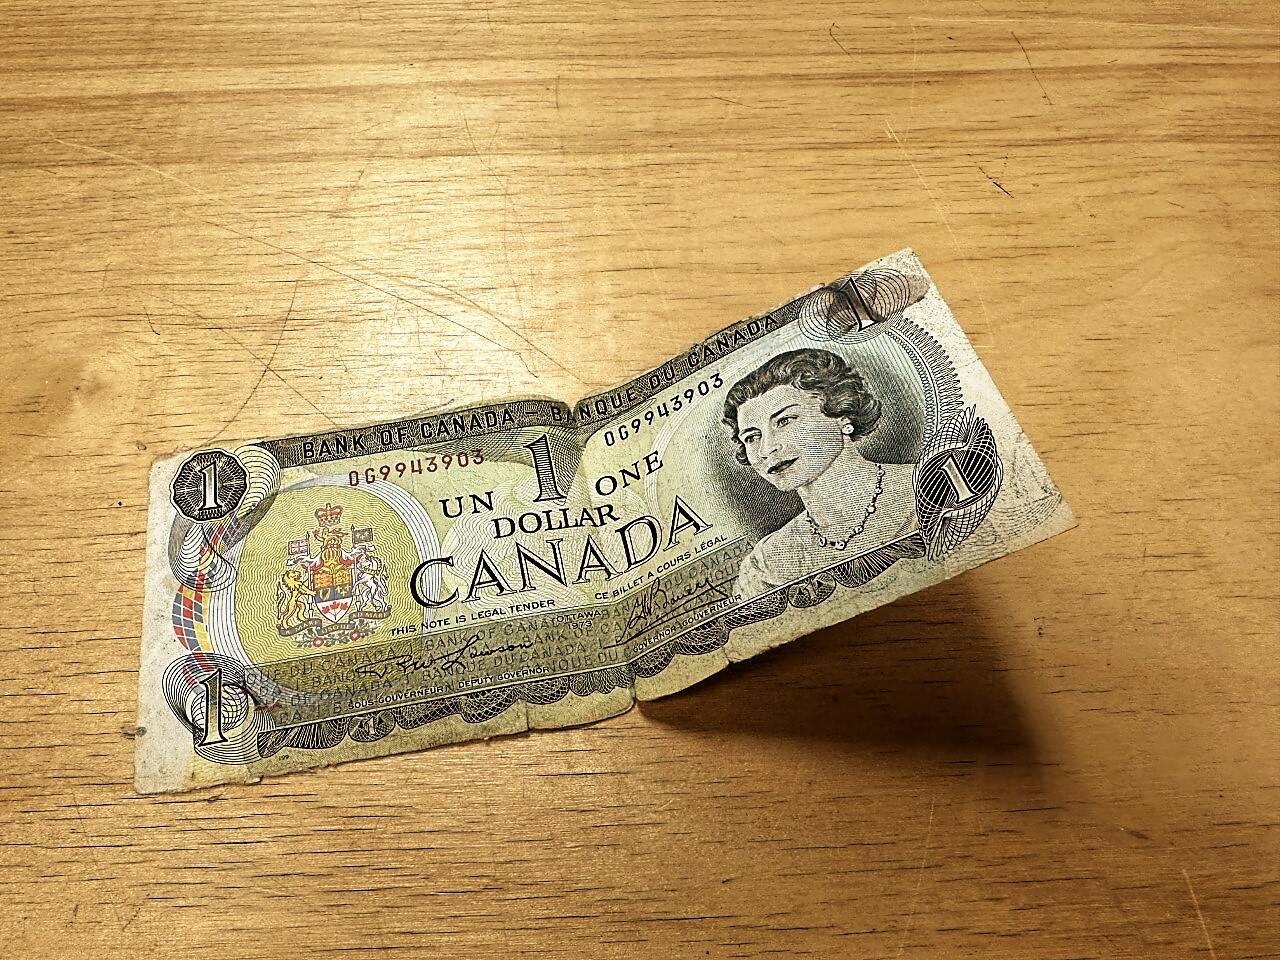 This is the original $1 bill that was the inspiration behind the artwork on Joe McBryan’s DC-3 plane. Kaicheng Xin/NNSL photo